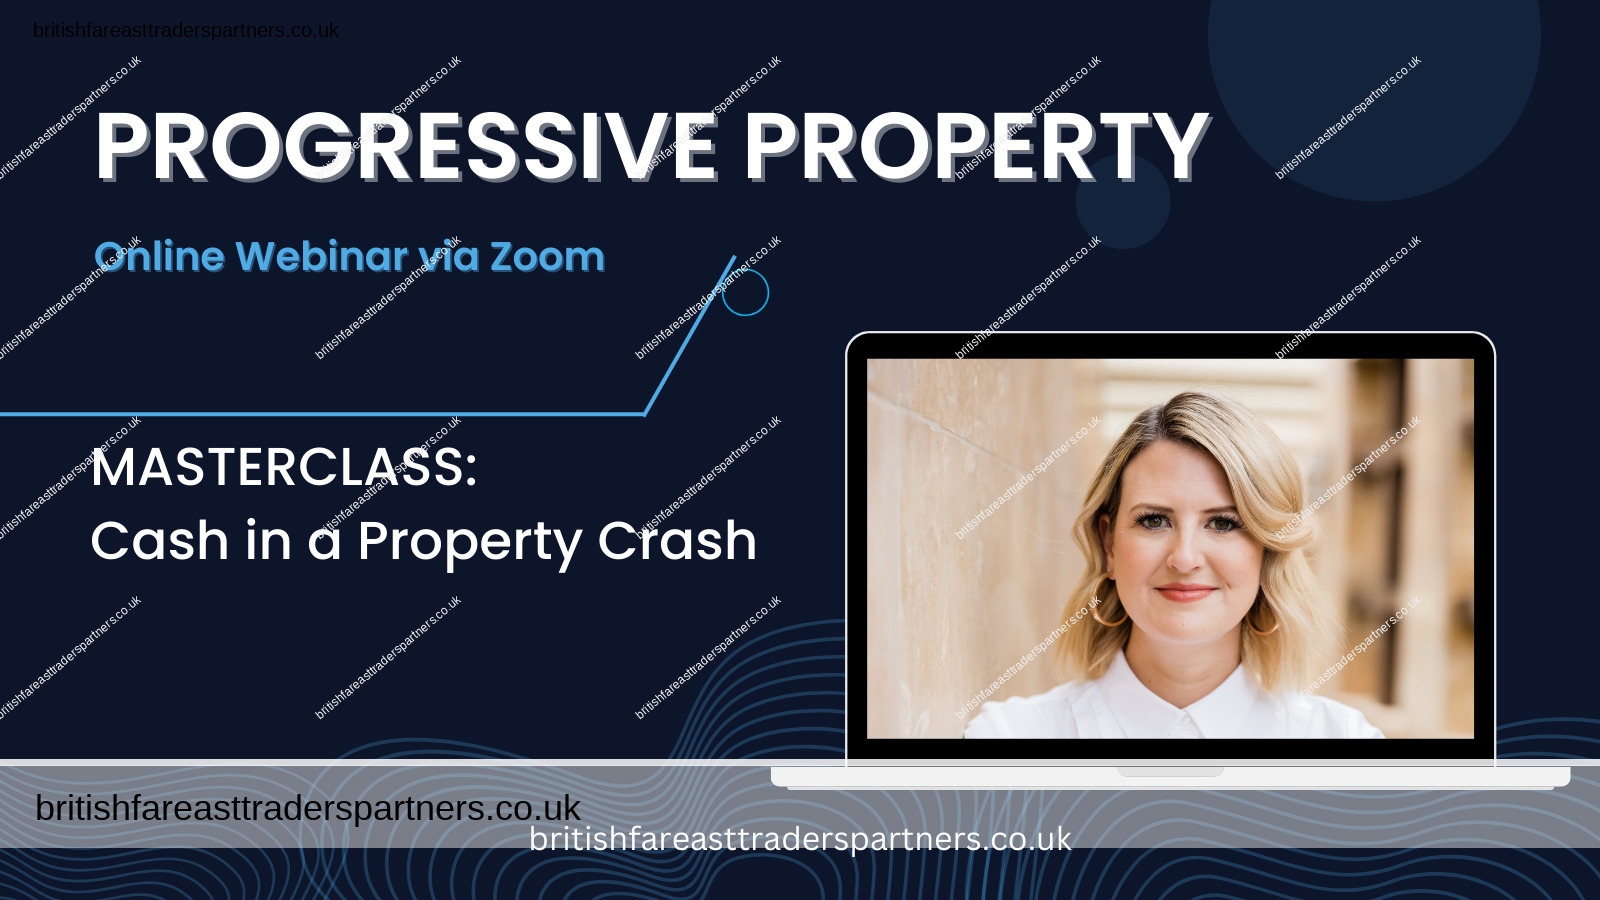 🔥 Join Rob Moore & Kevin McDonnell on Oct 8th, 7:30pm for a game-changing webinar on the UK property market! Don’t miss this high-ROI event! 🏠💡📈   #PropertyInvestment #FinancialFreedom  Learn more 👉https://tinyurl.com/ydhxttyj